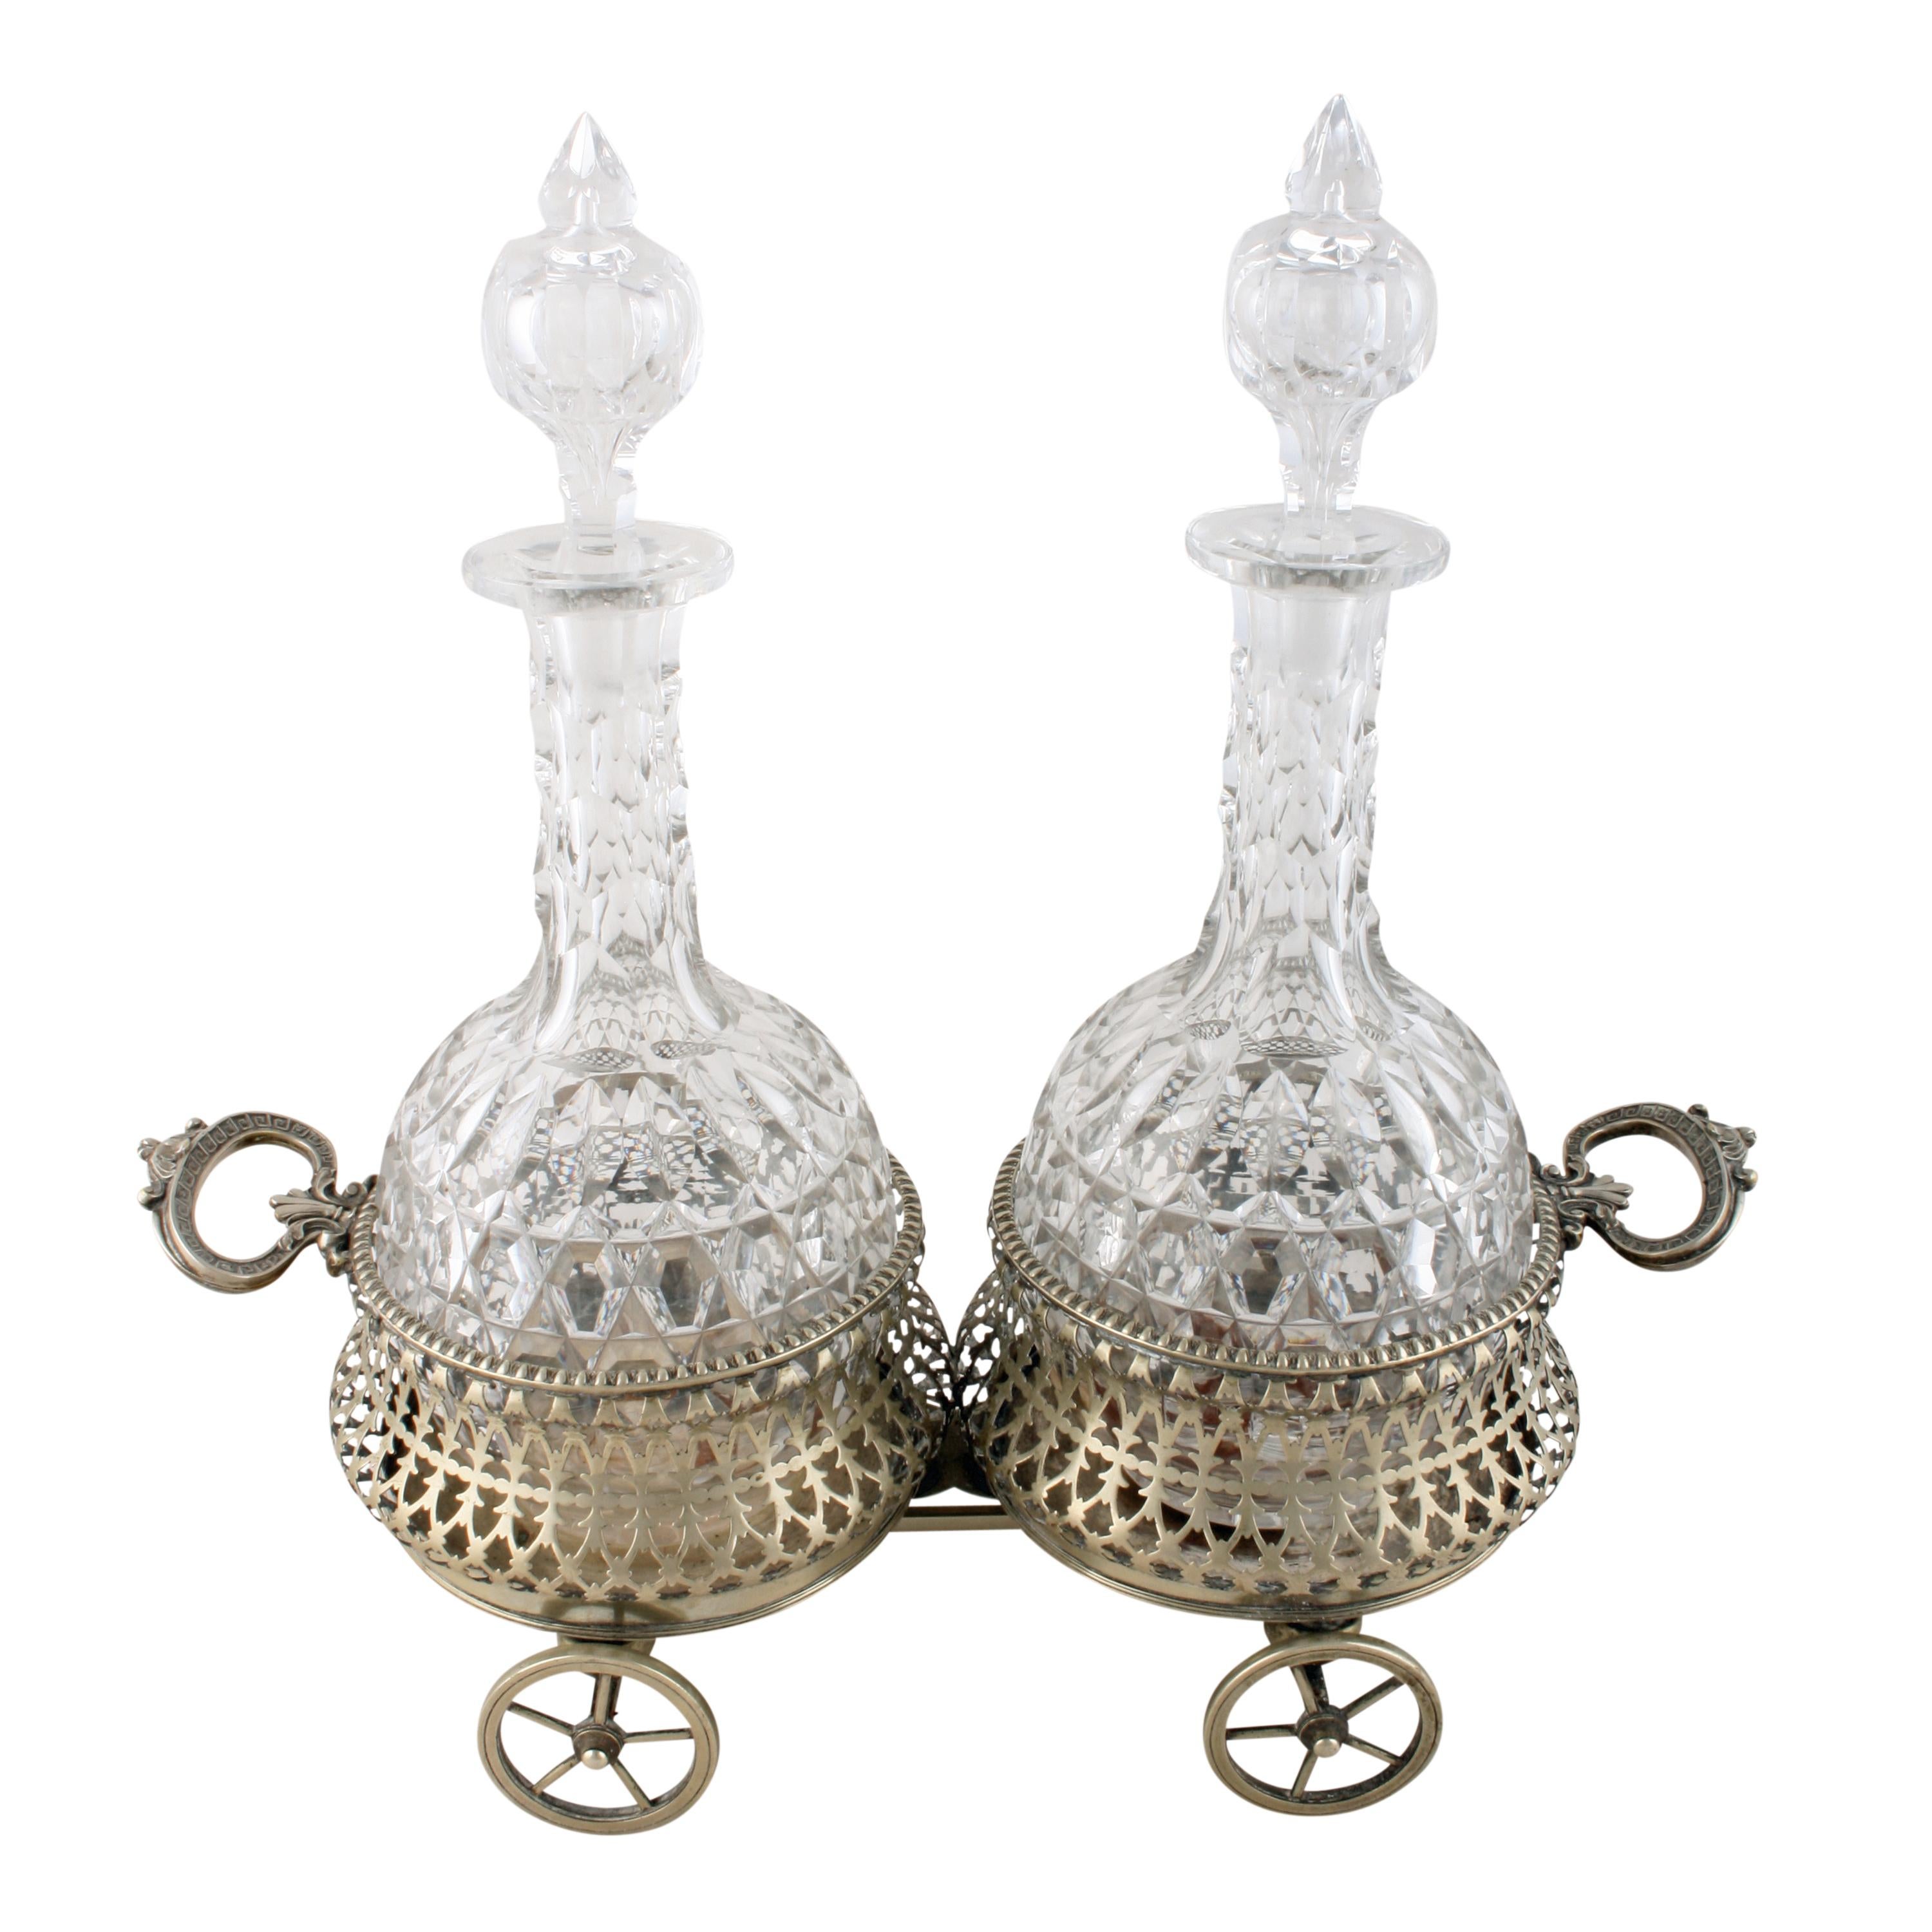 English Silver Plated Coaster Wagon and Decanters